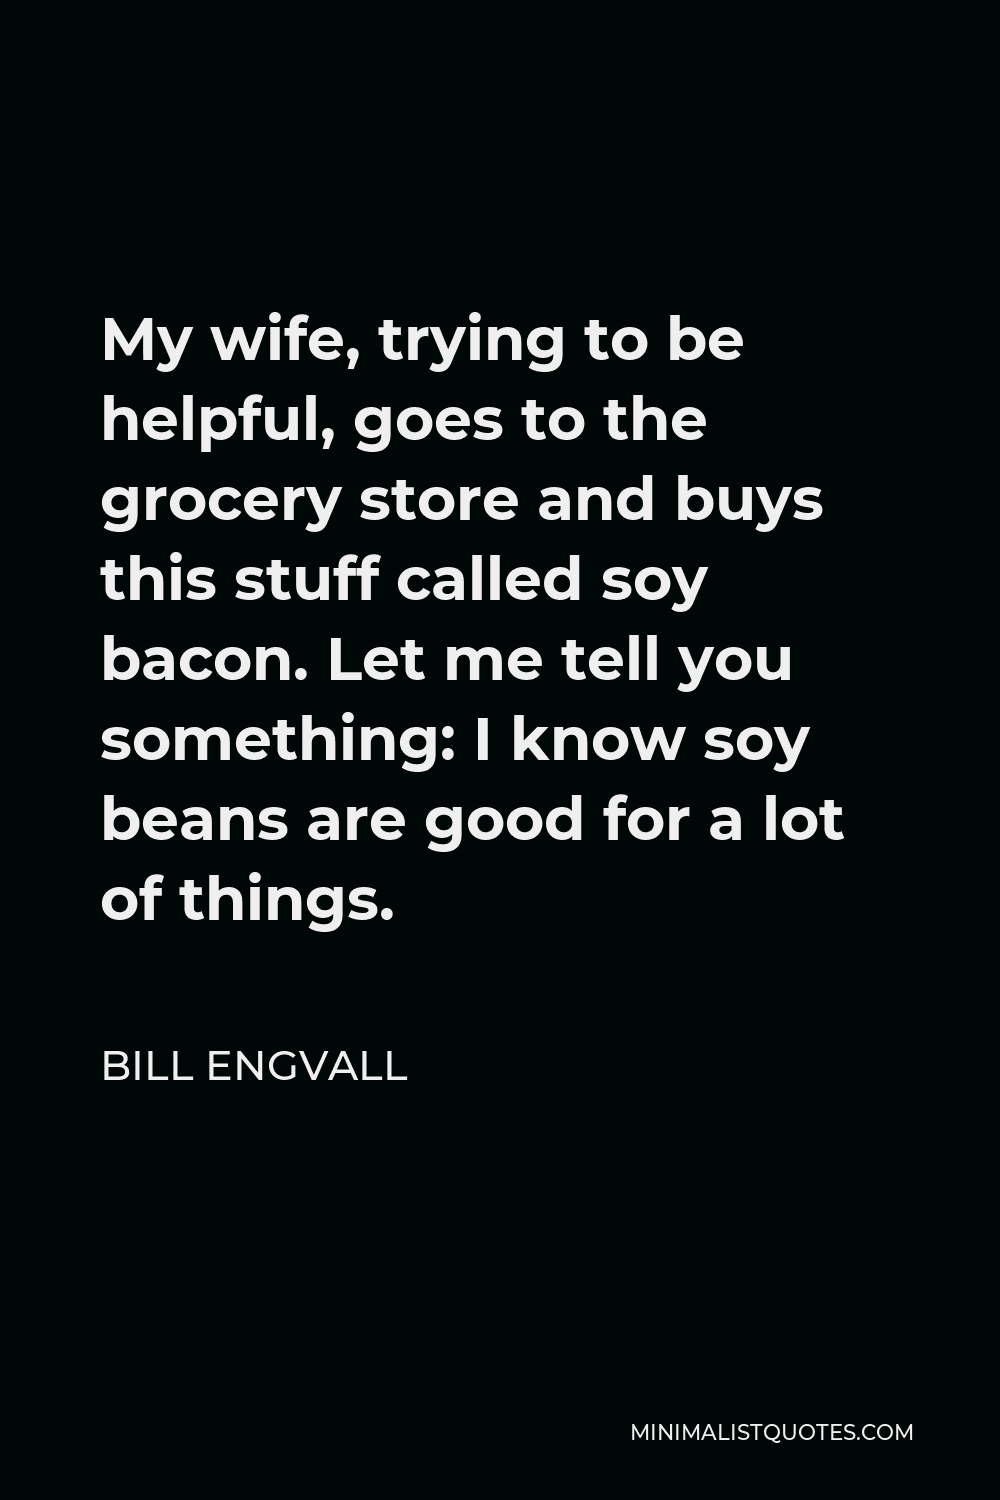 Bill Engvall Quote - My wife, trying to be helpful, goes to the grocery store and buys this stuff called soy bacon. Let me tell you something: I know soy beans are good for a lot of things.